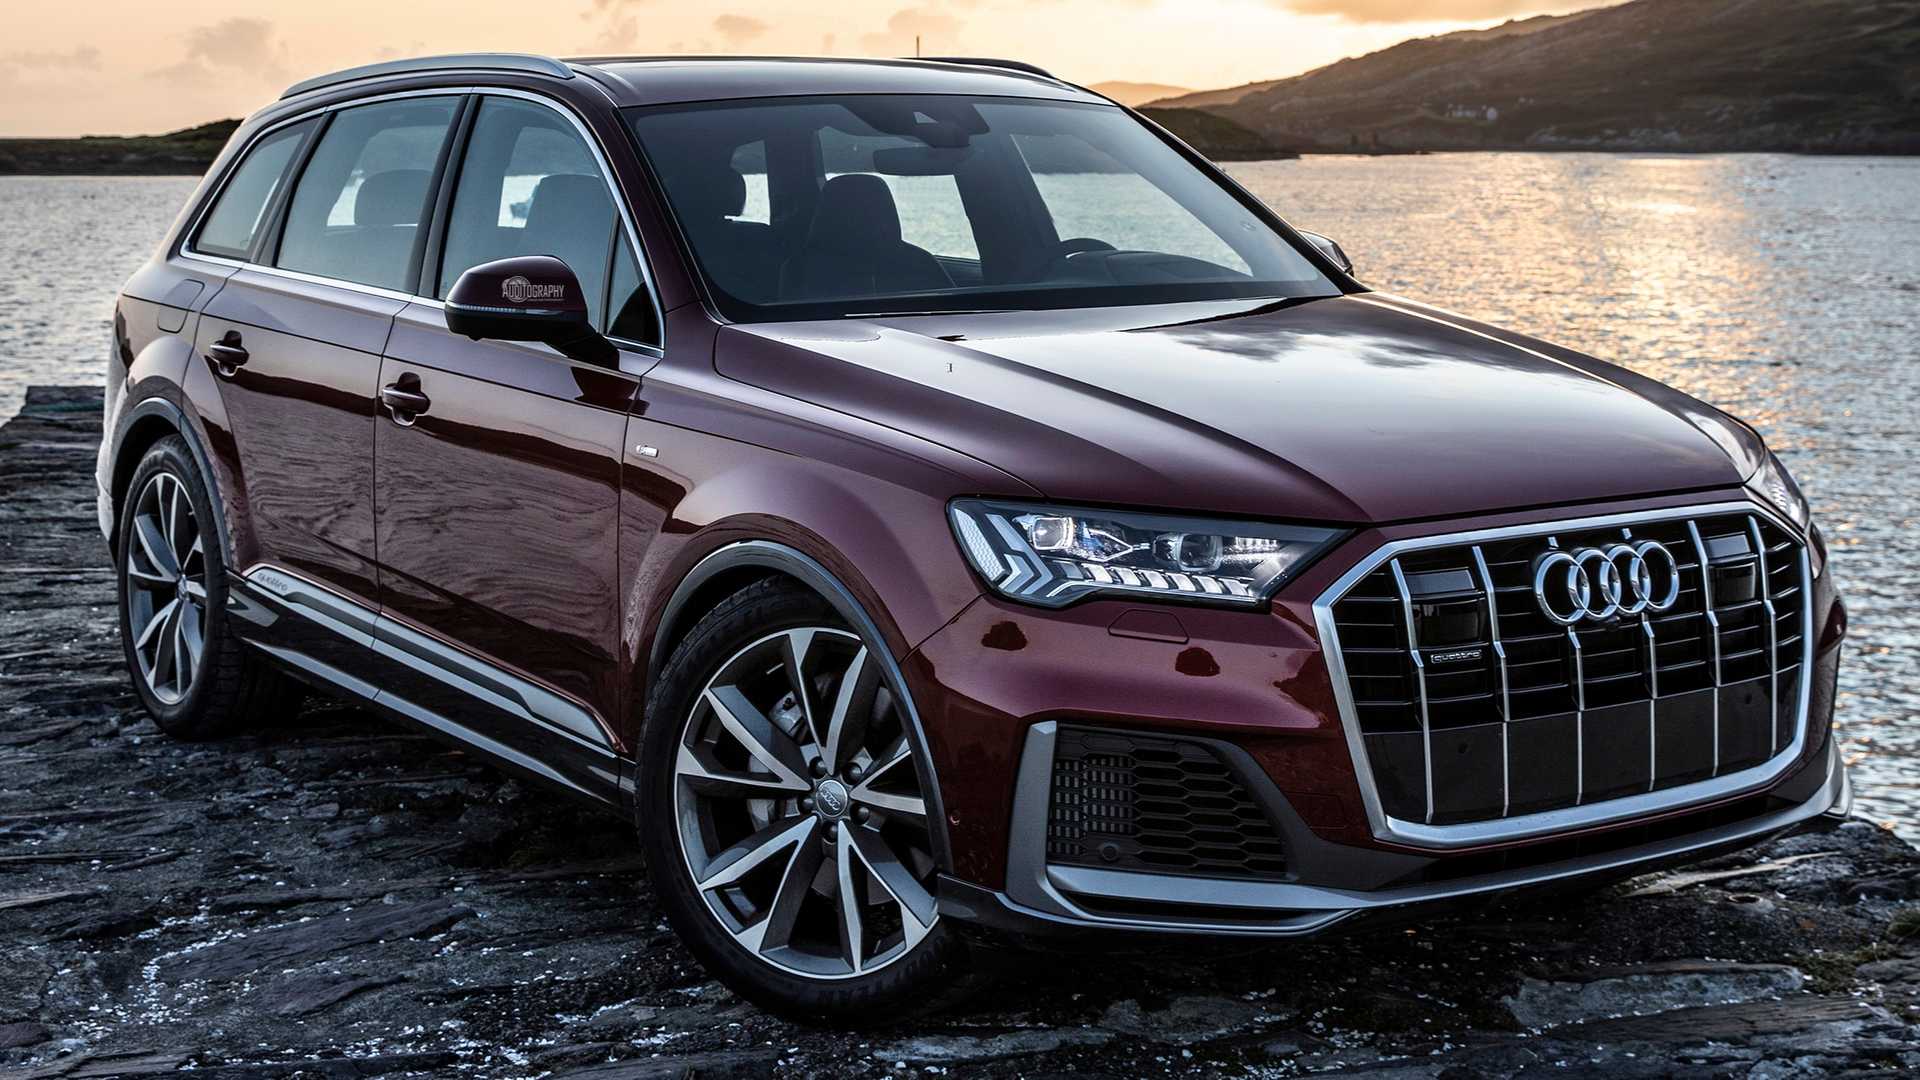 Audi Q7 For Hire In UAE 